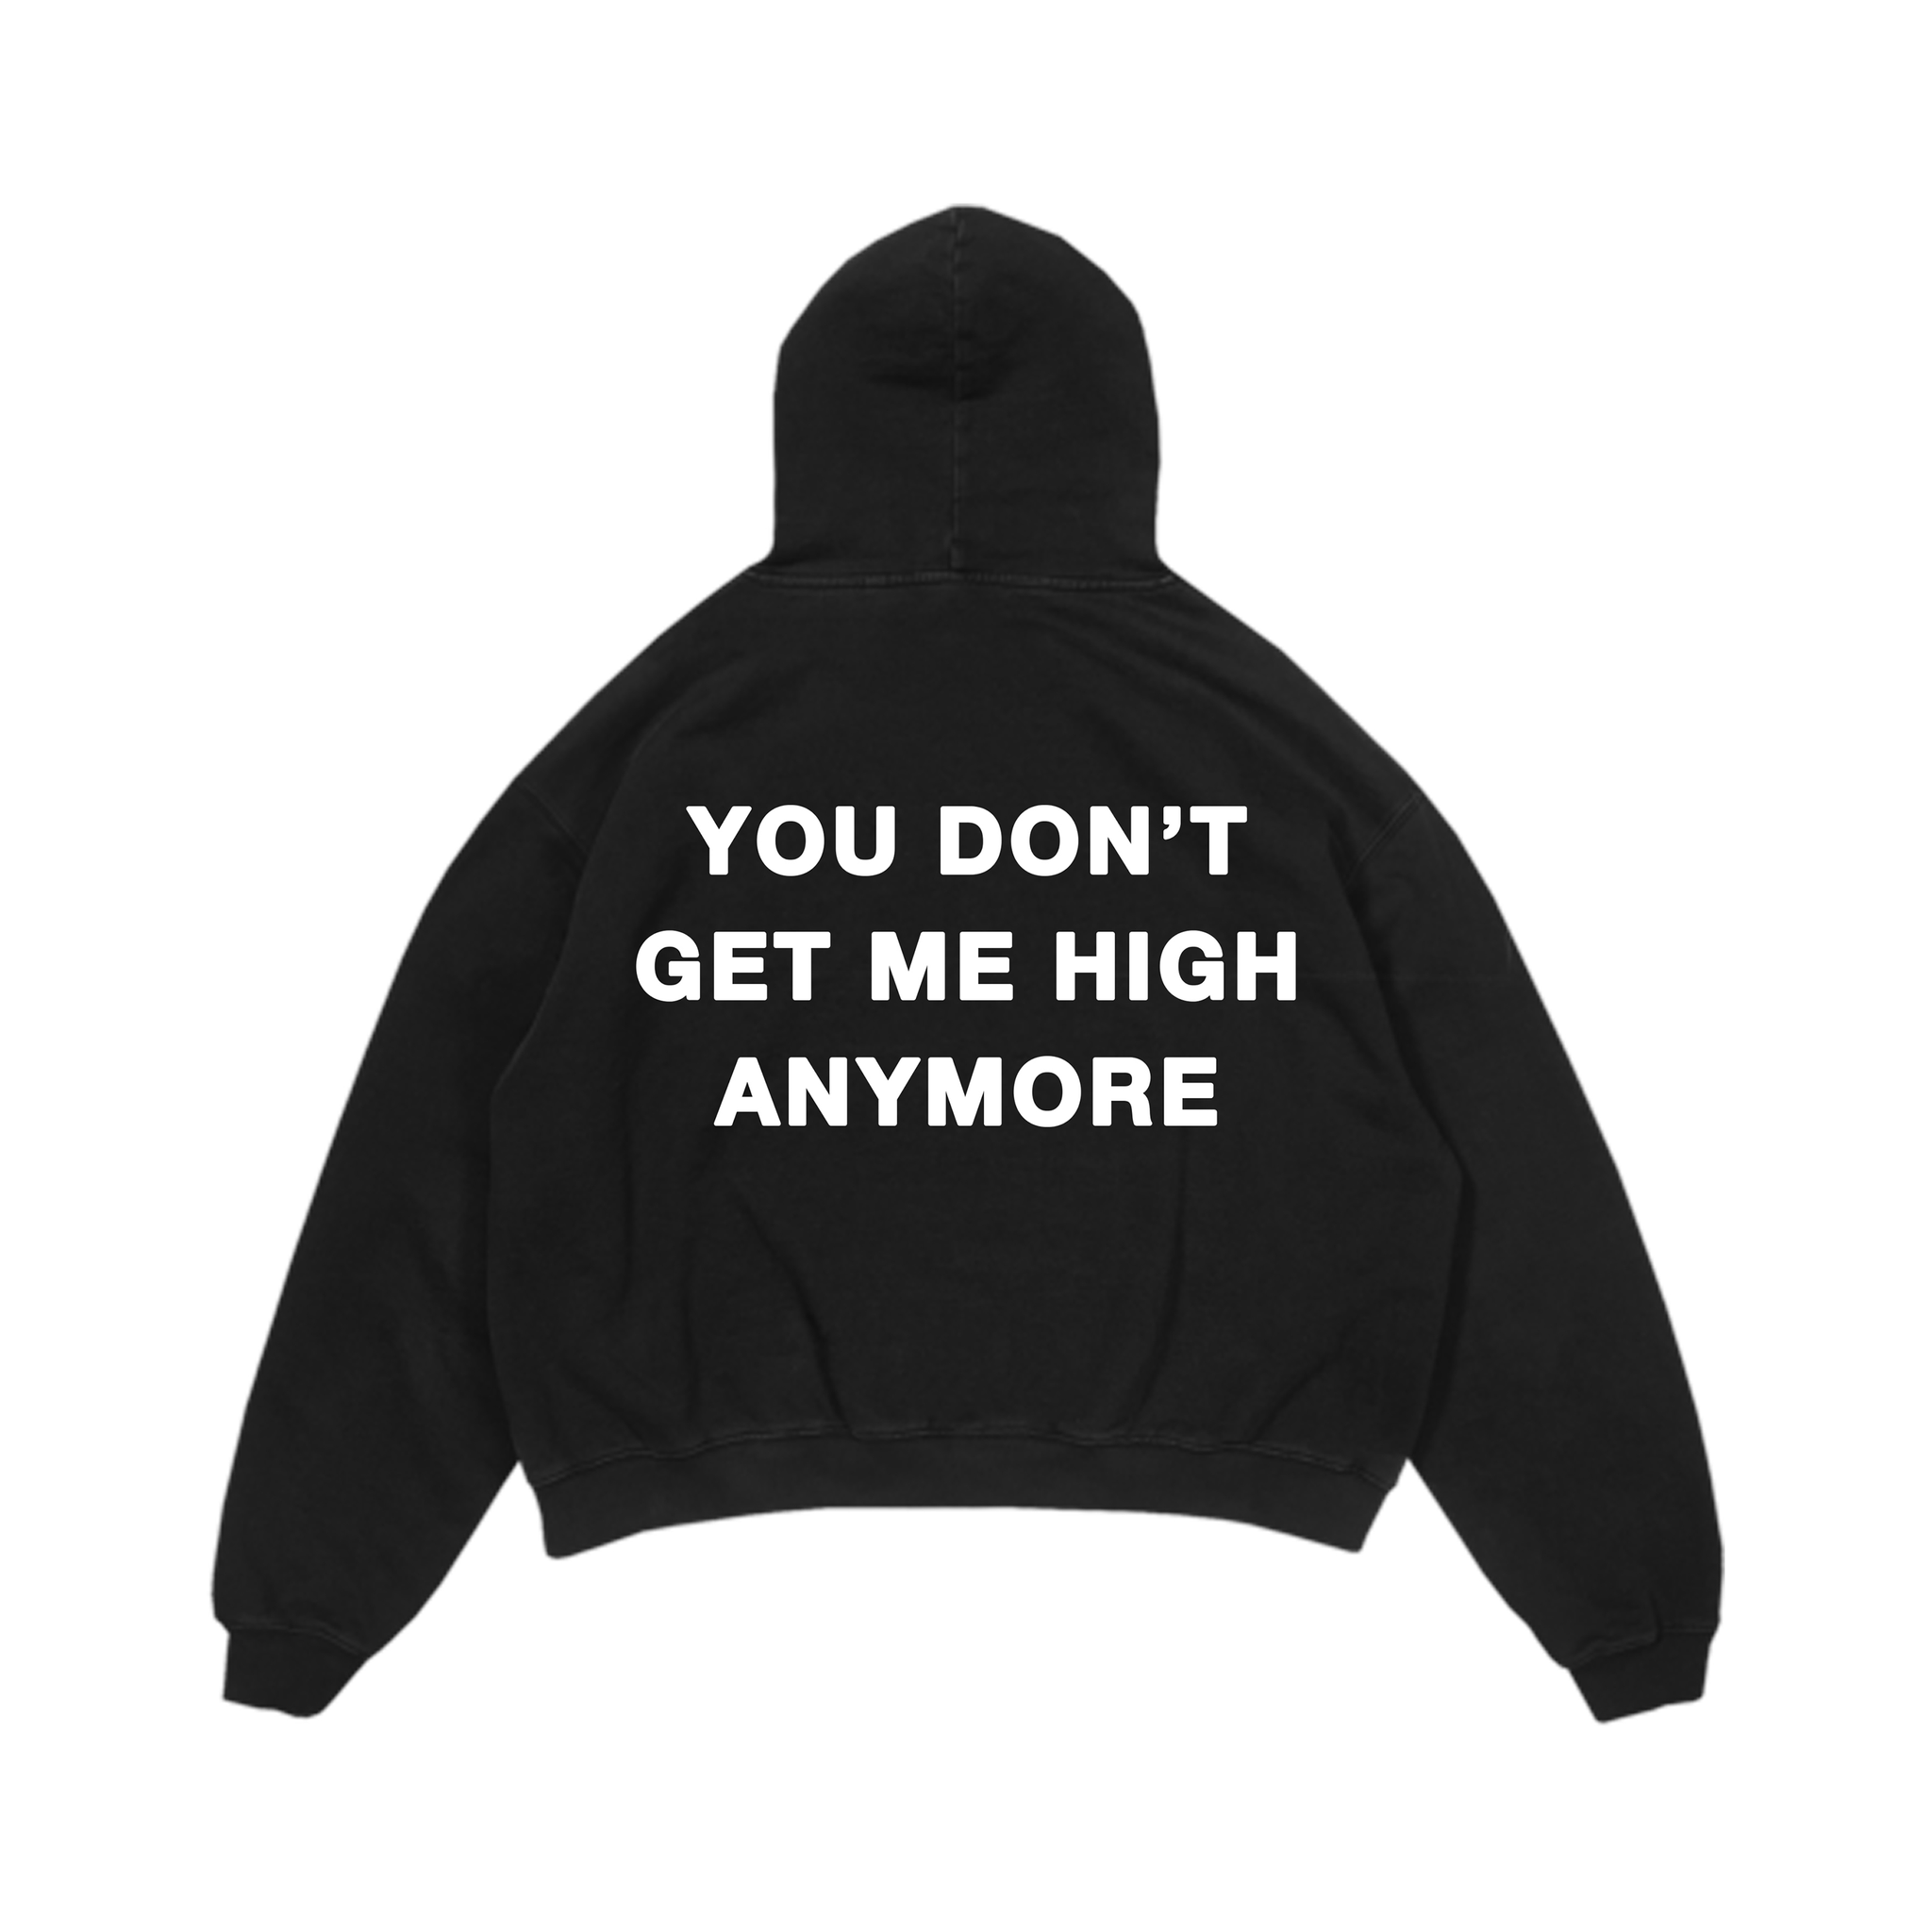 "YOU DON'T GET ME HIGH ANYMORE" - BLACK HOODIE